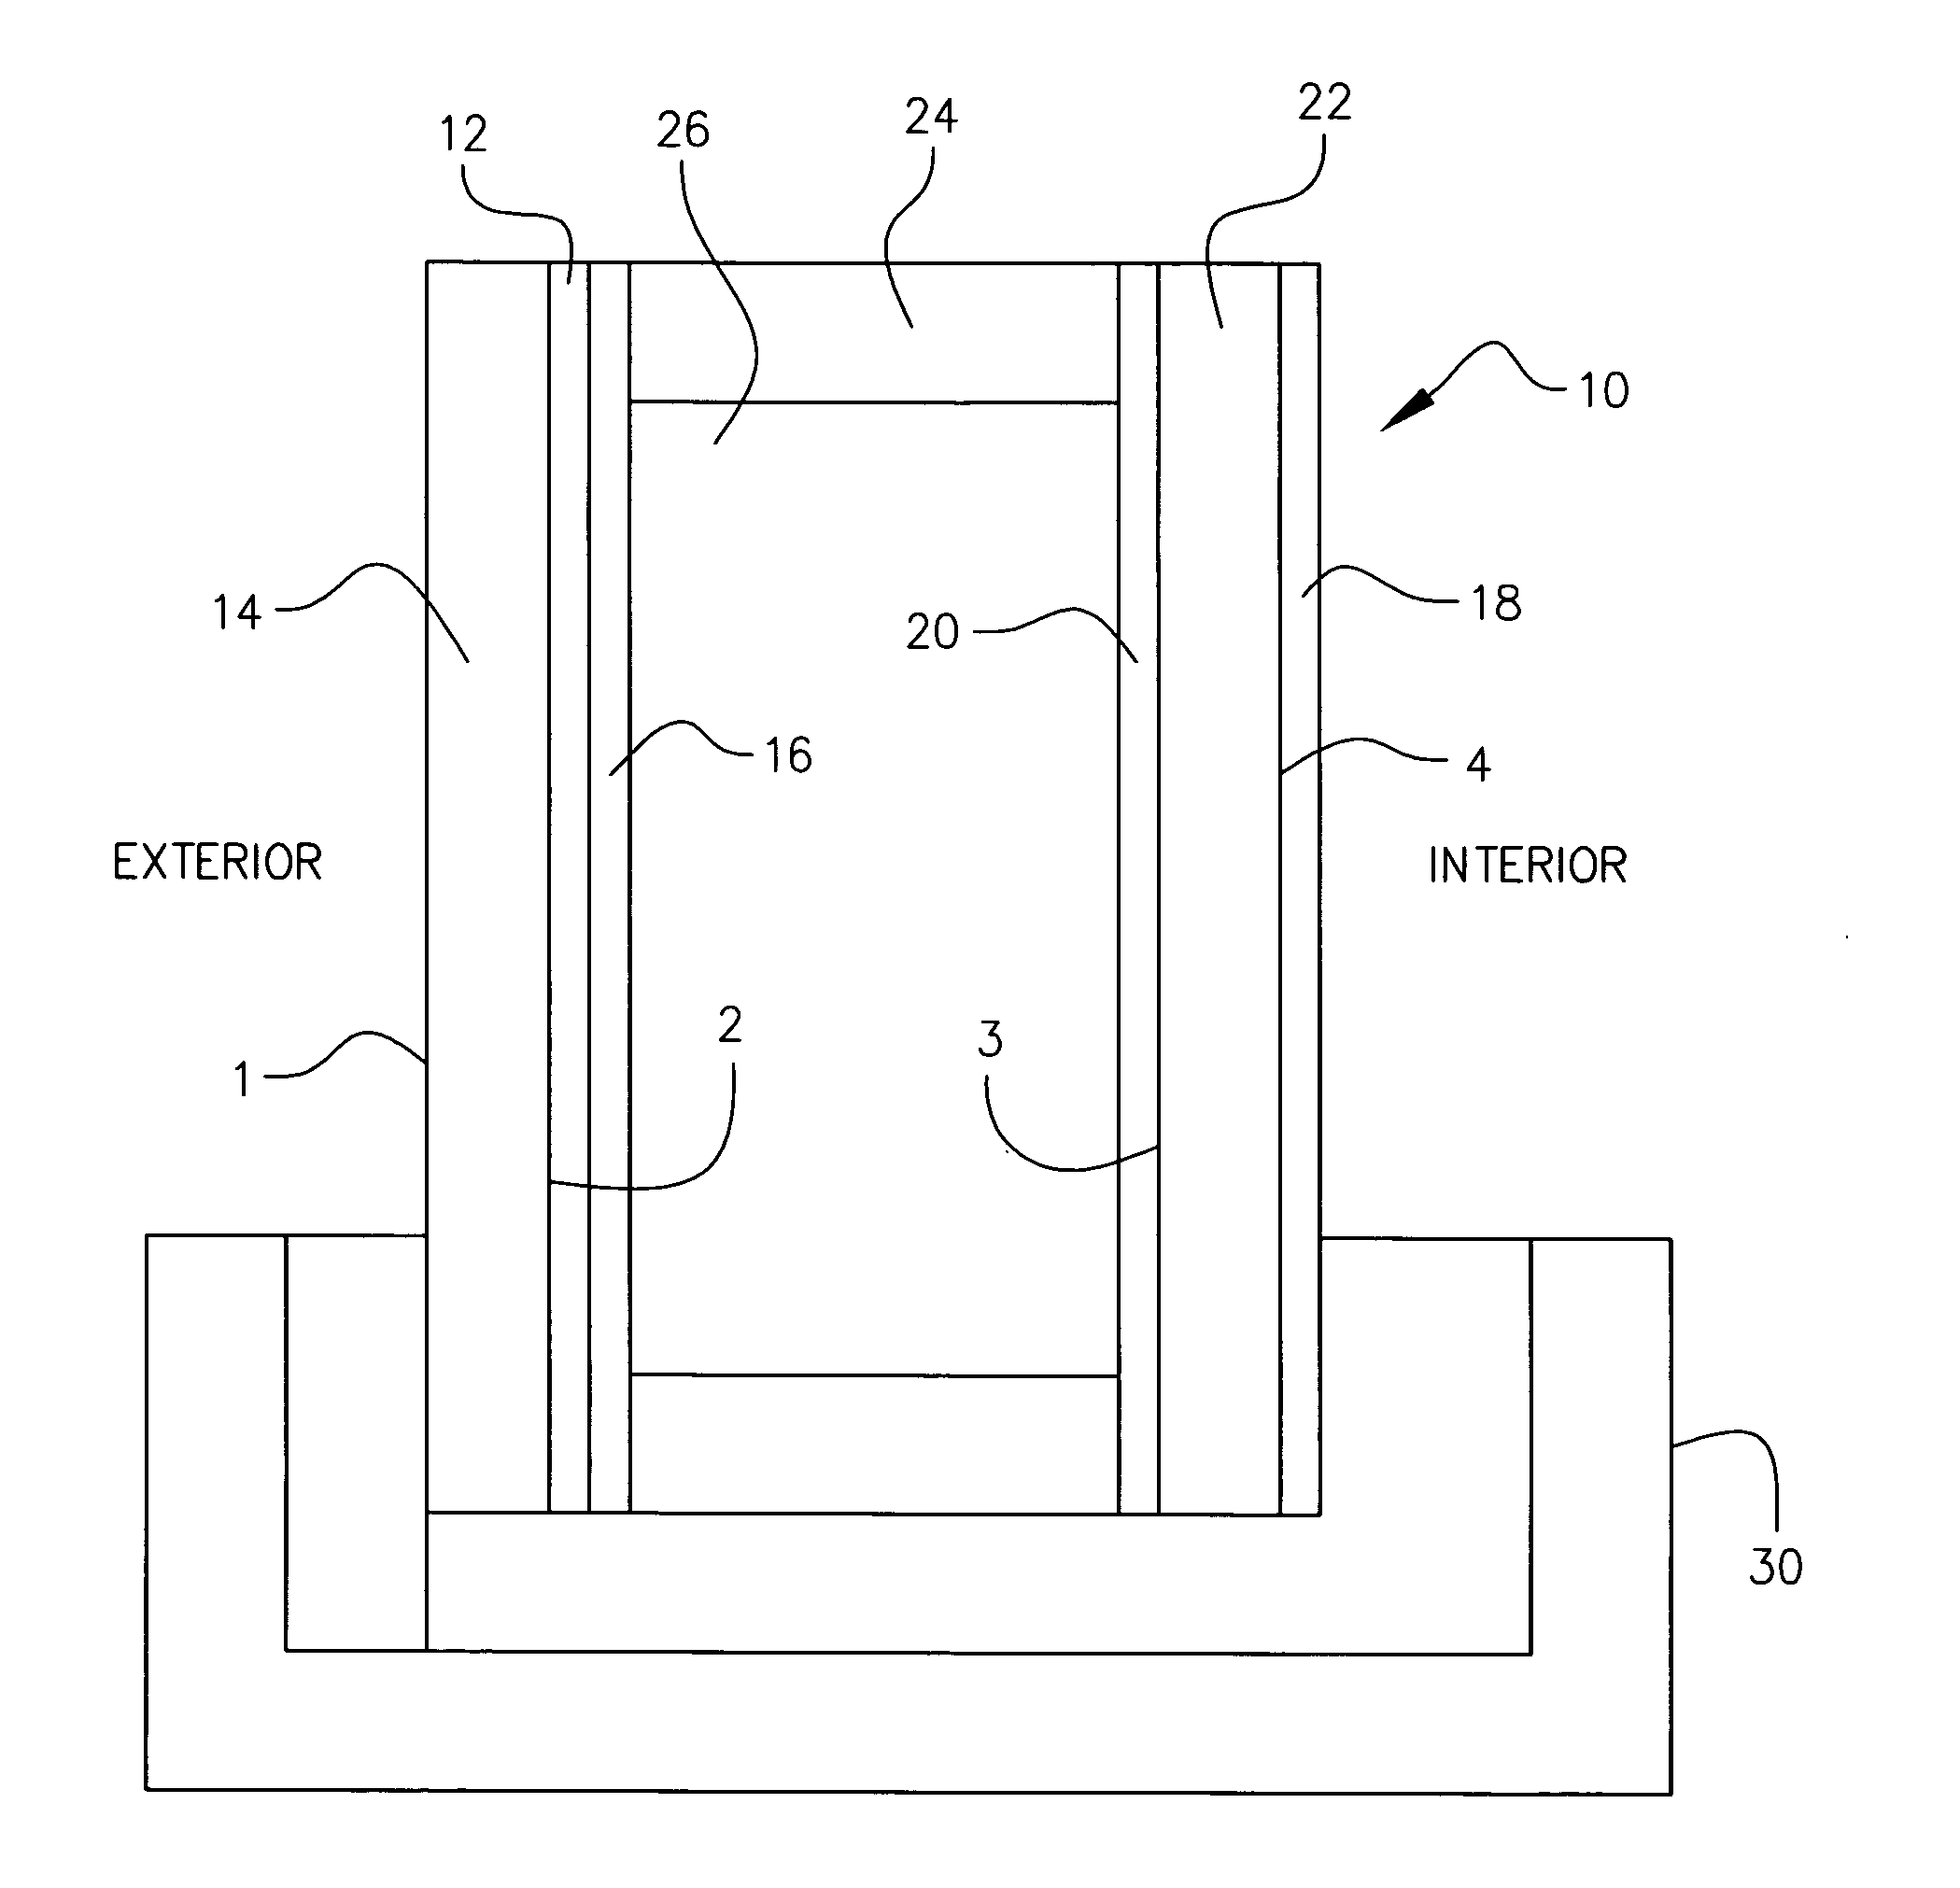 Method of manufacturing an impact resistant and insulated glass unit composite with solar control and low-E coatings